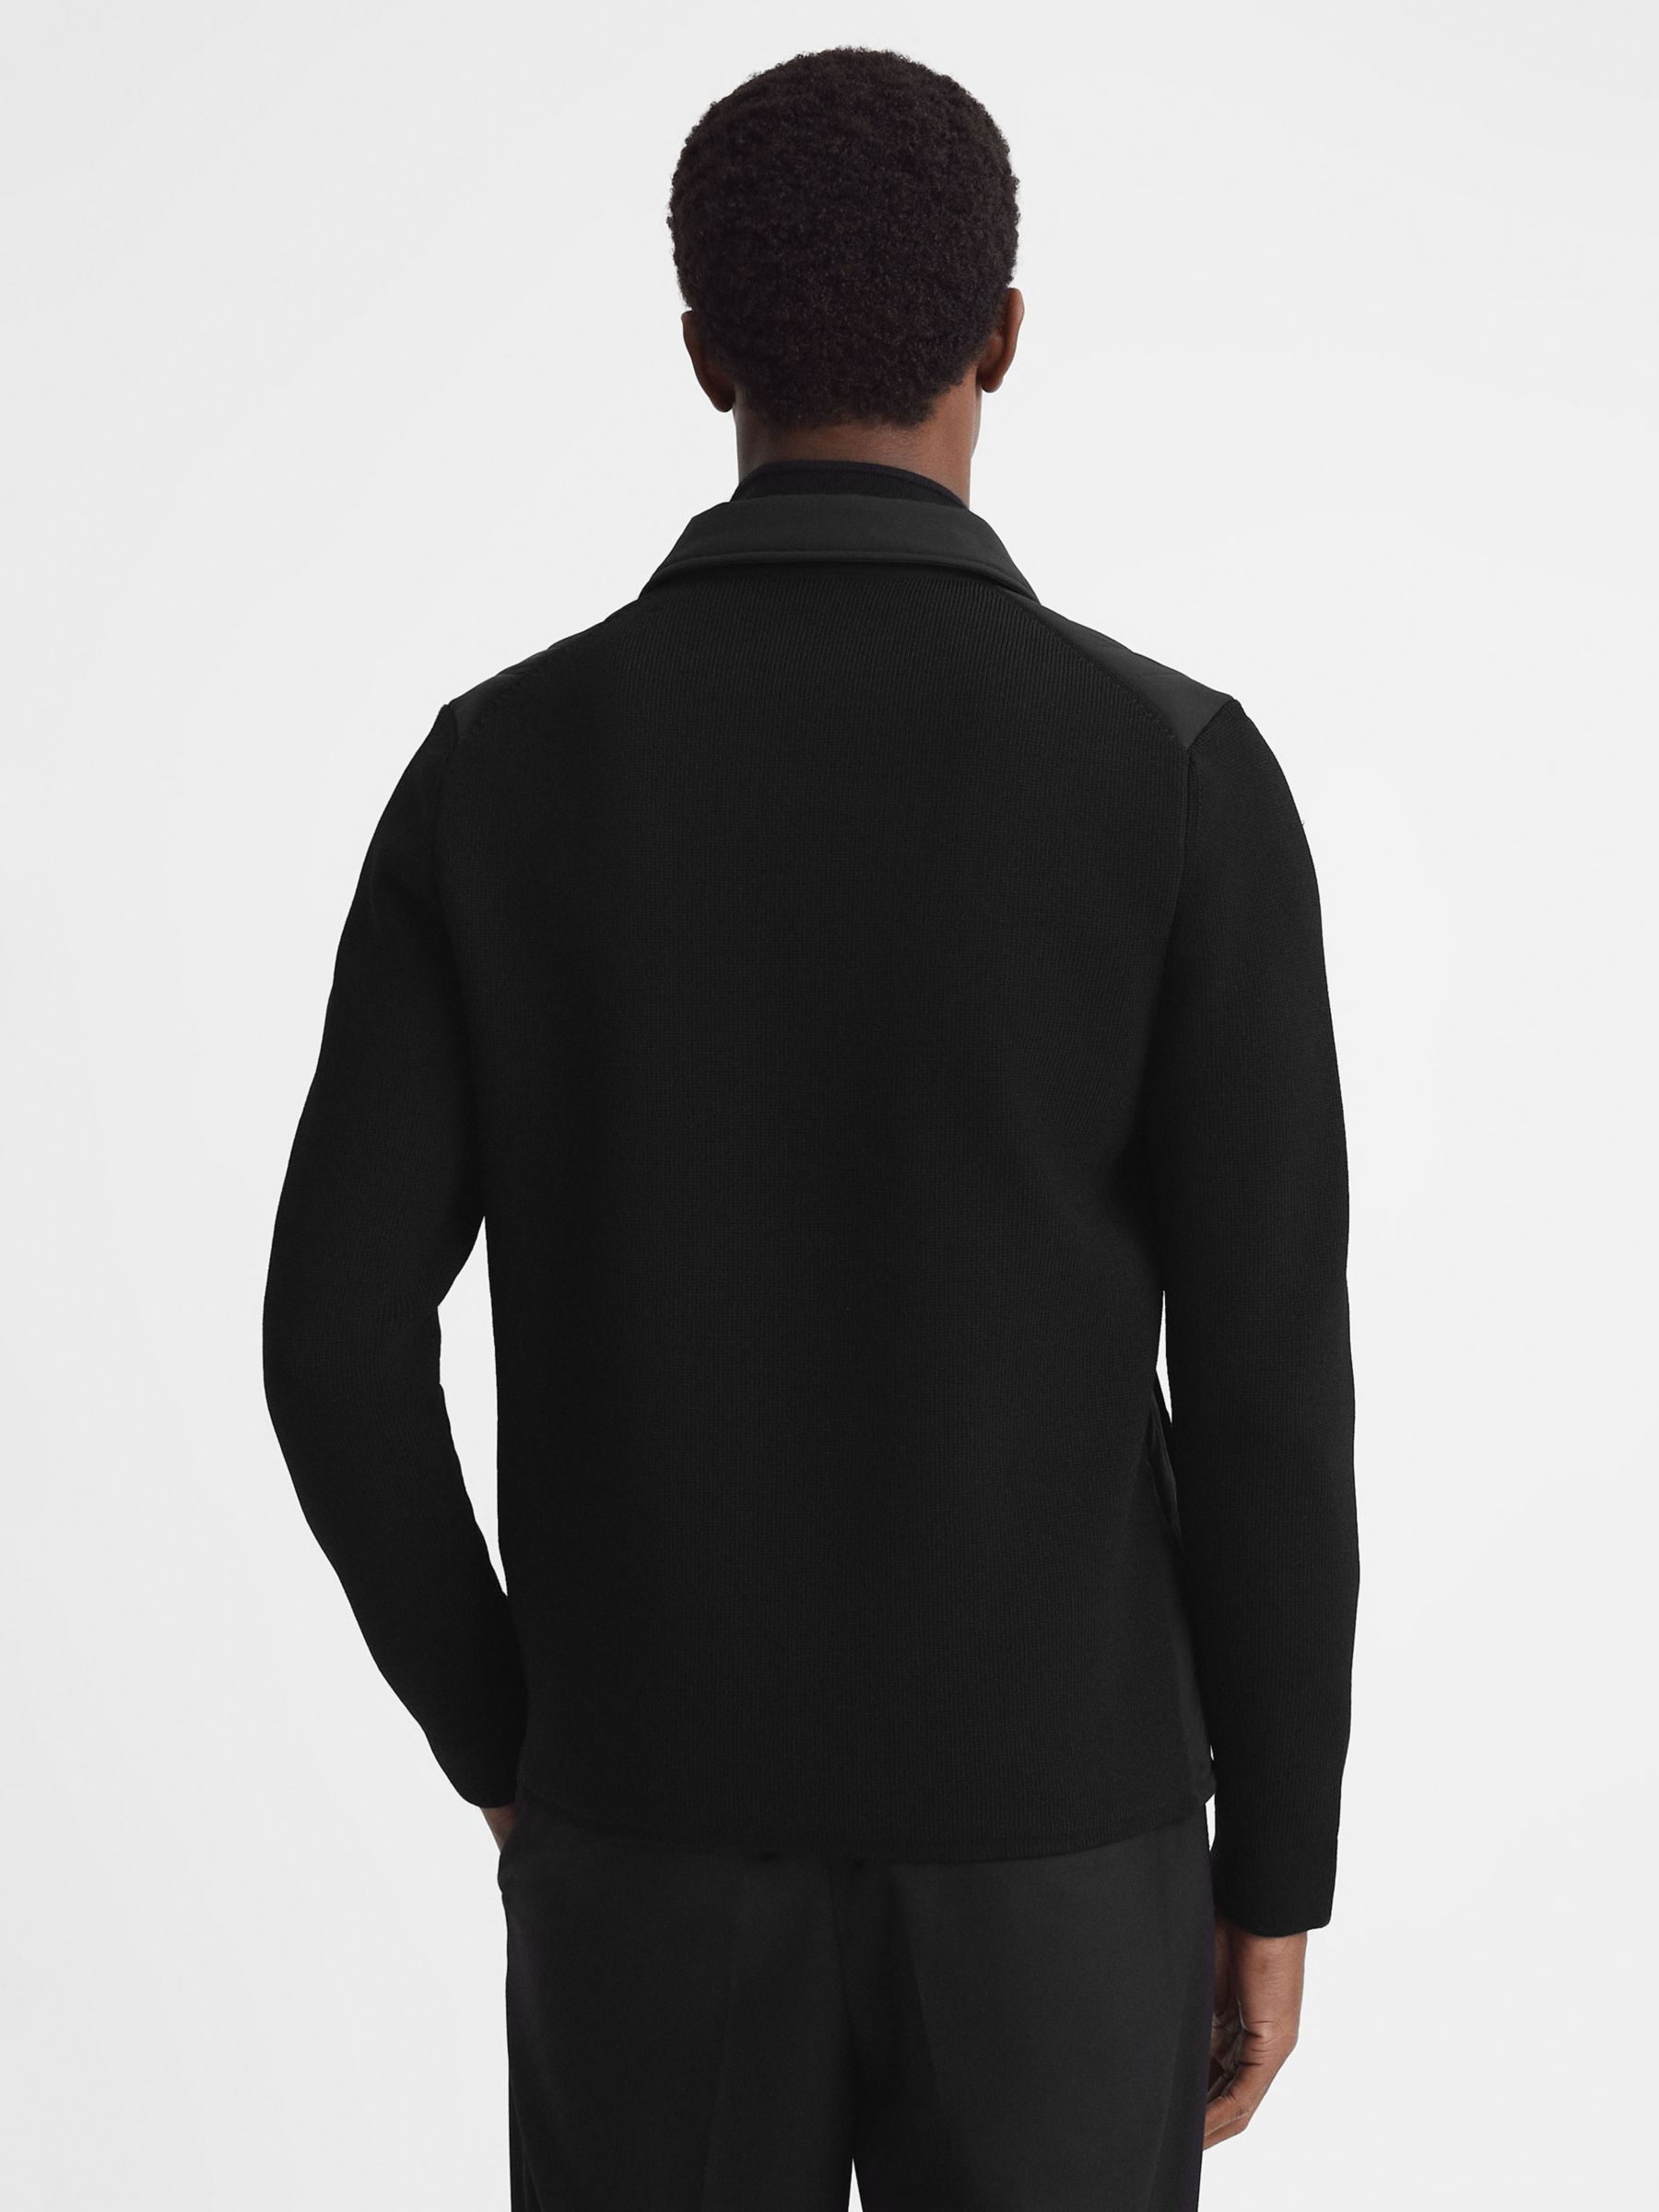 Buy Reiss Tosca Long Sleeve Through Quilted Jacket Online at johnlewis.com